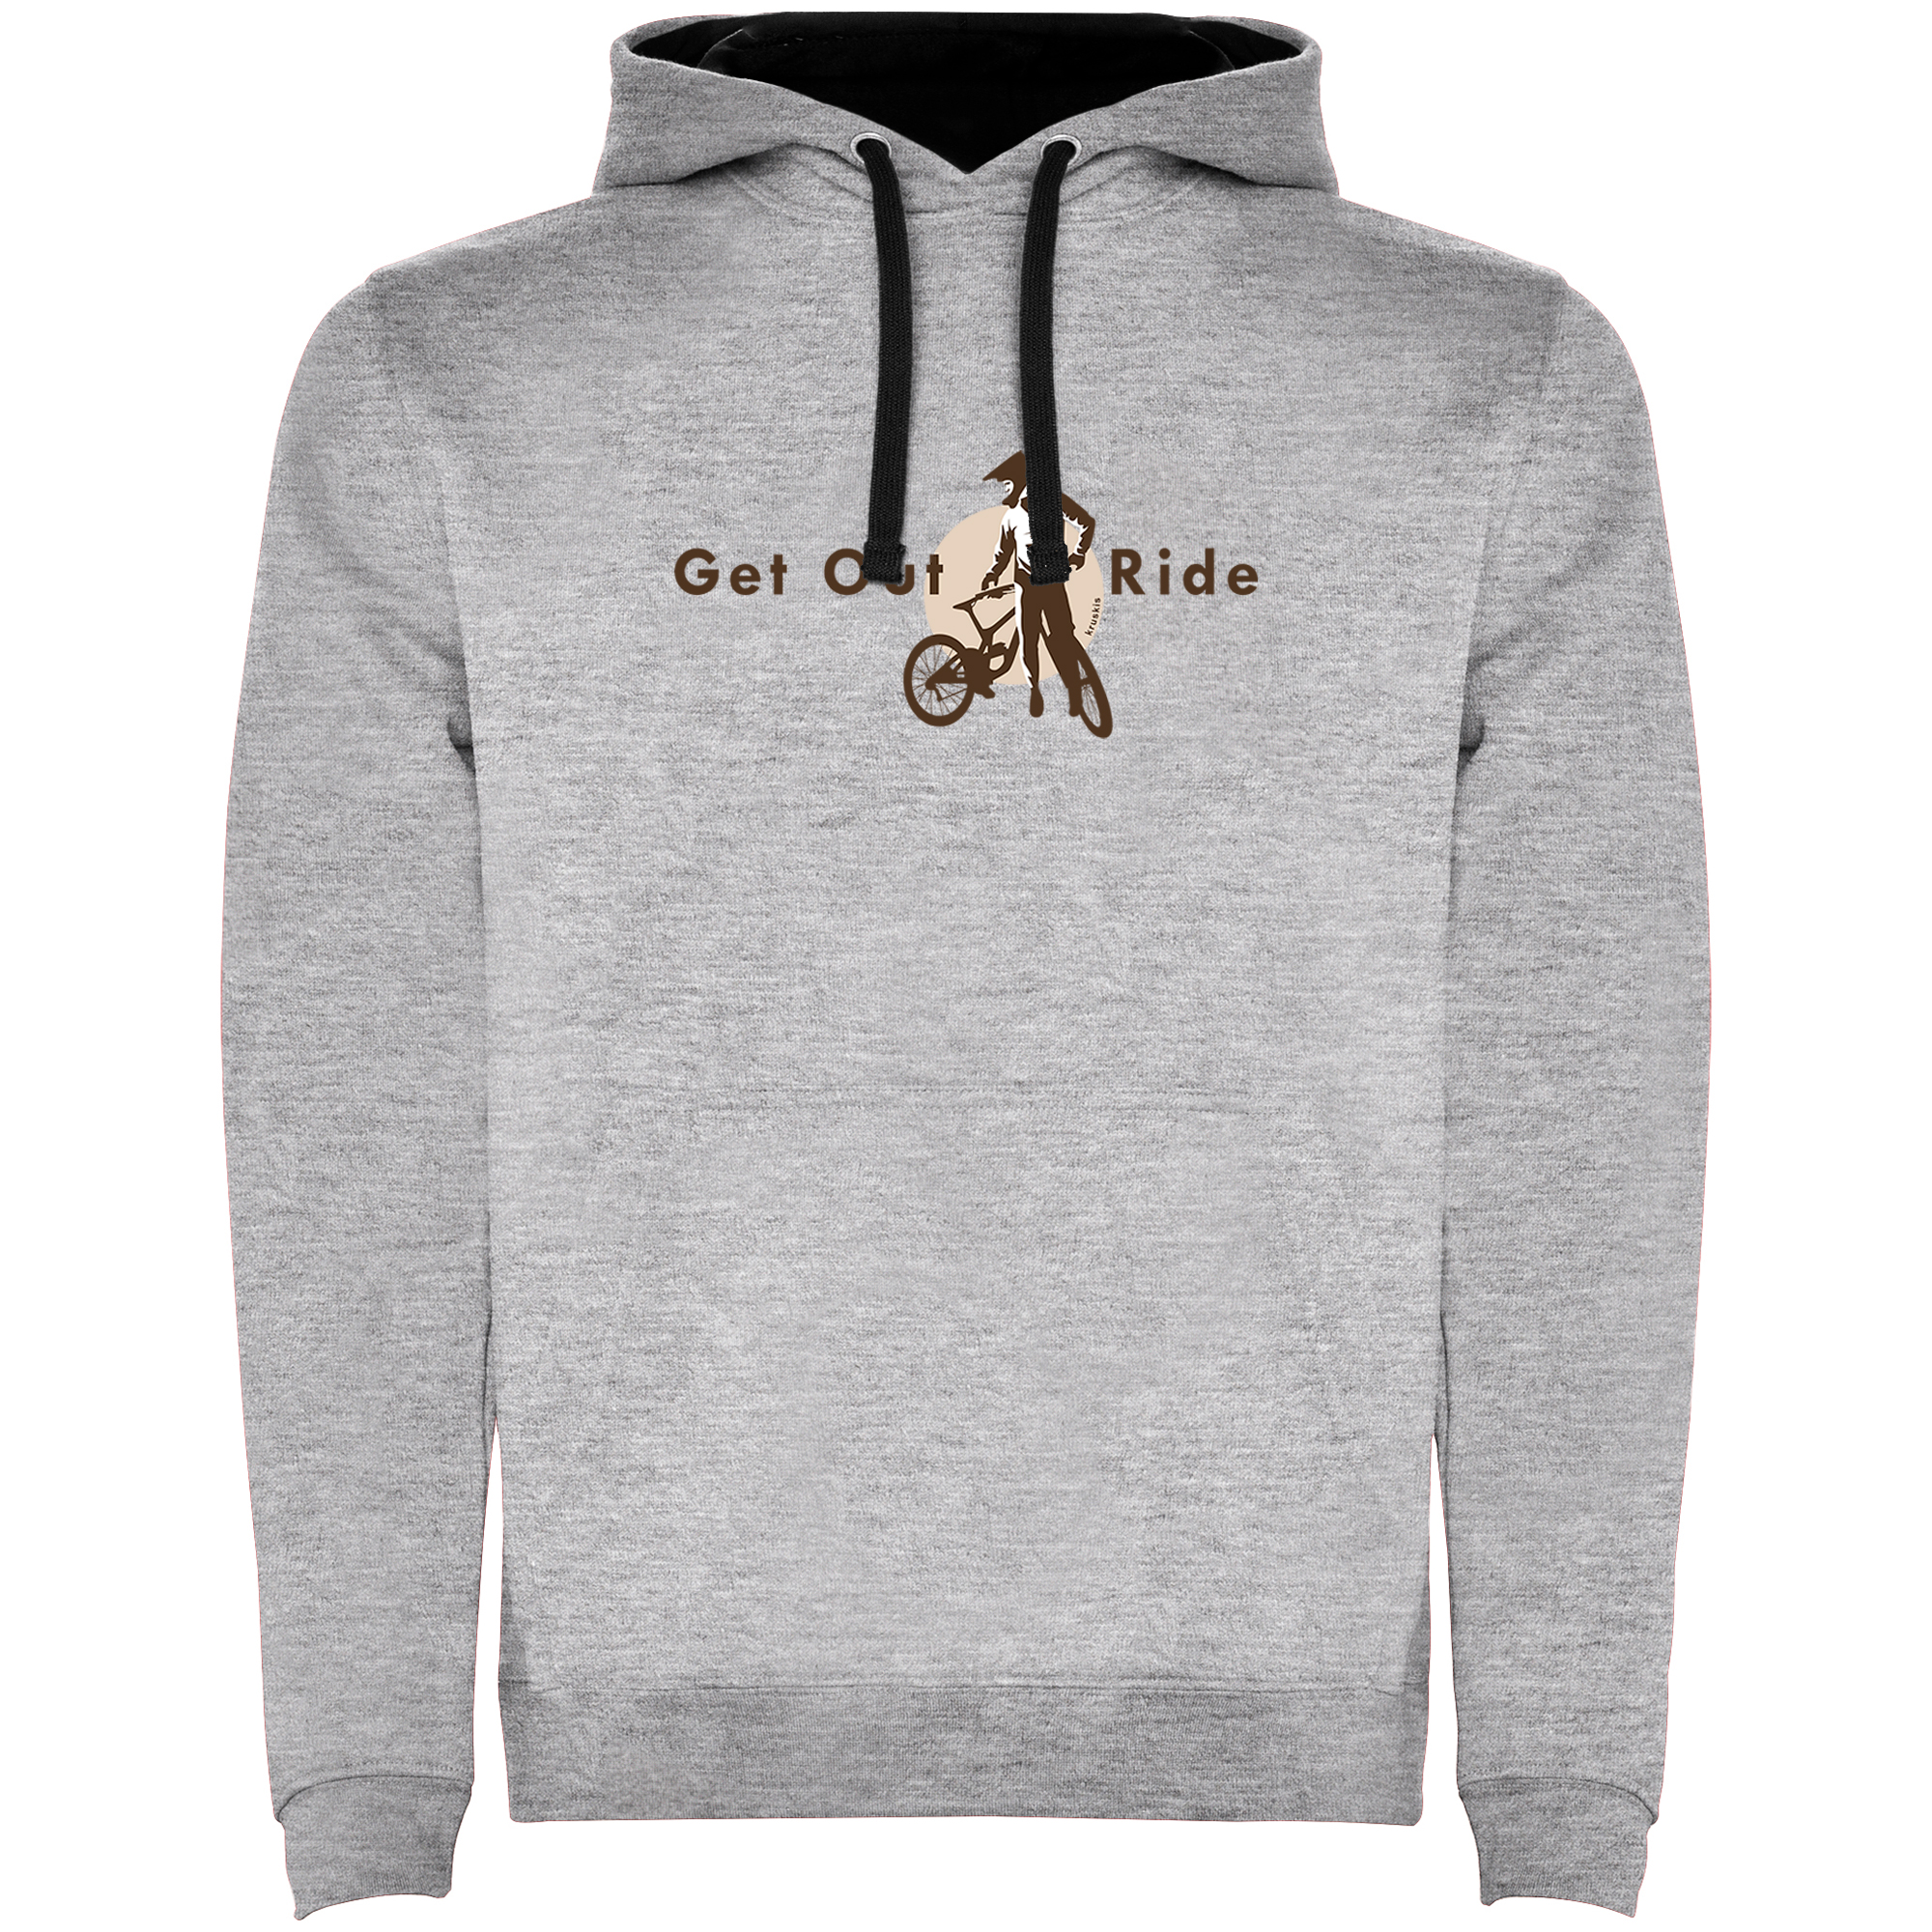 Kapuzenpullover MTB Get Out and Ride Unisex